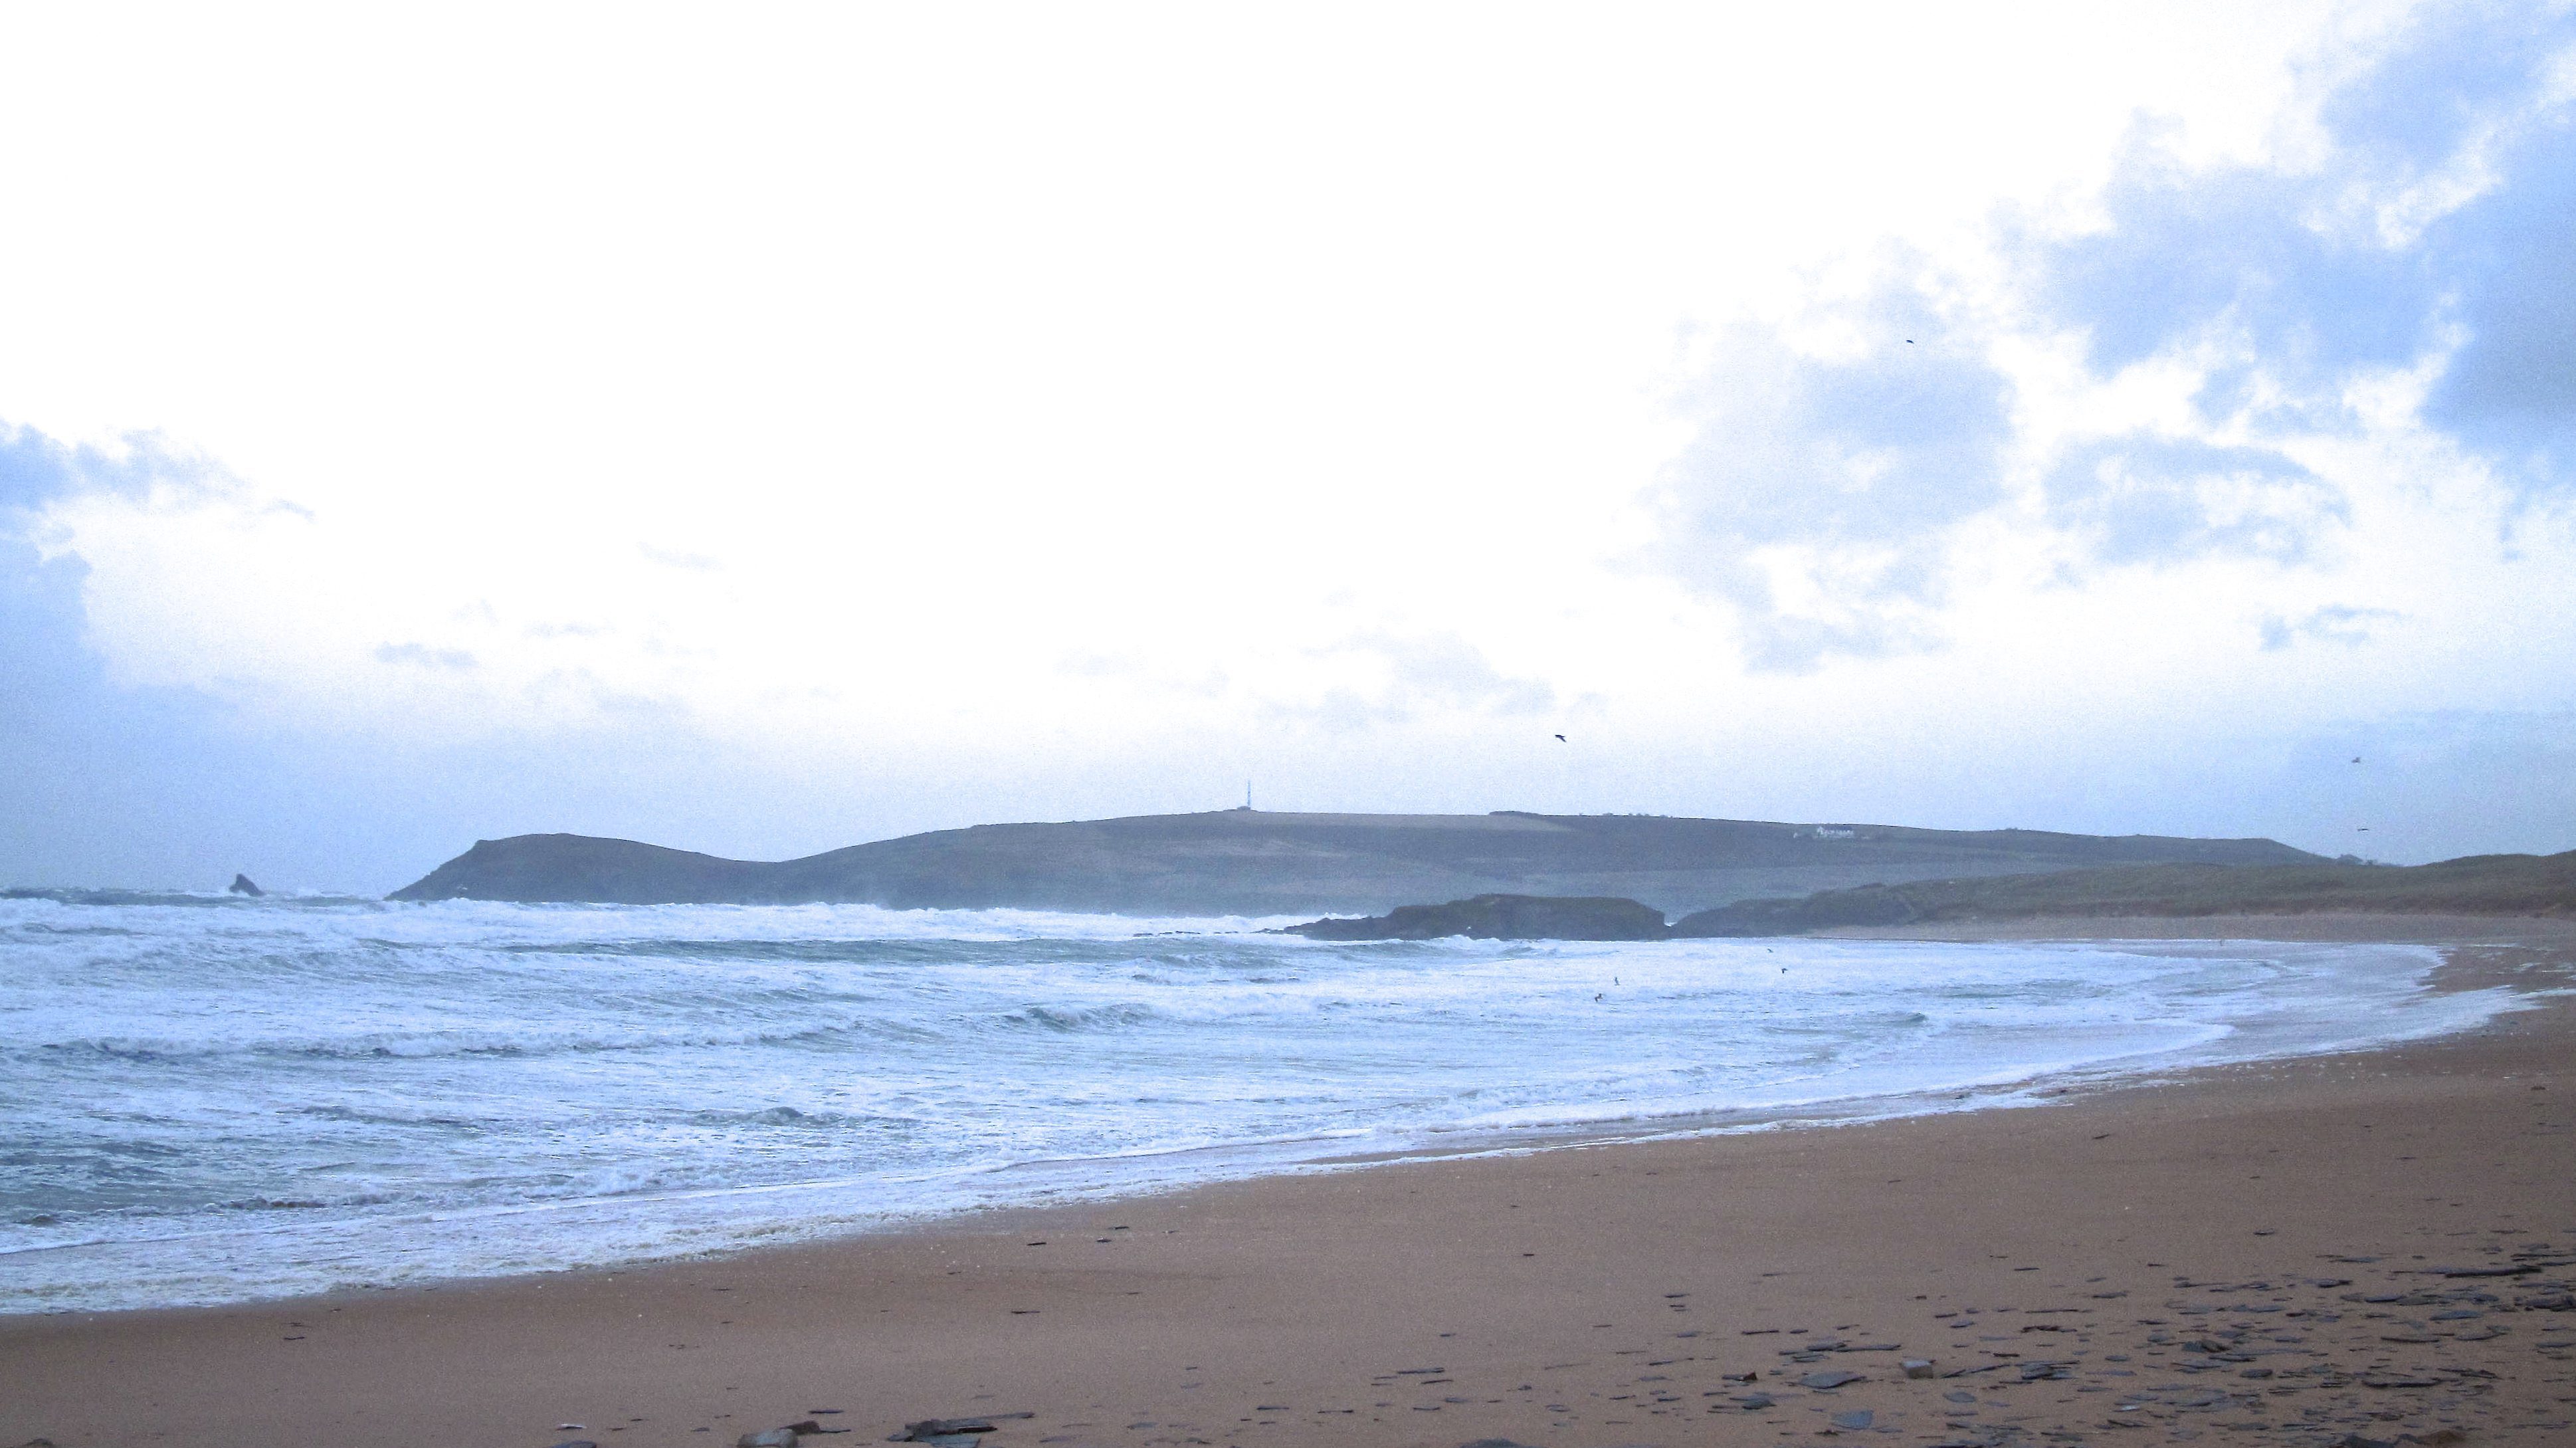 Surf Report for Tuesday 24th February 2015